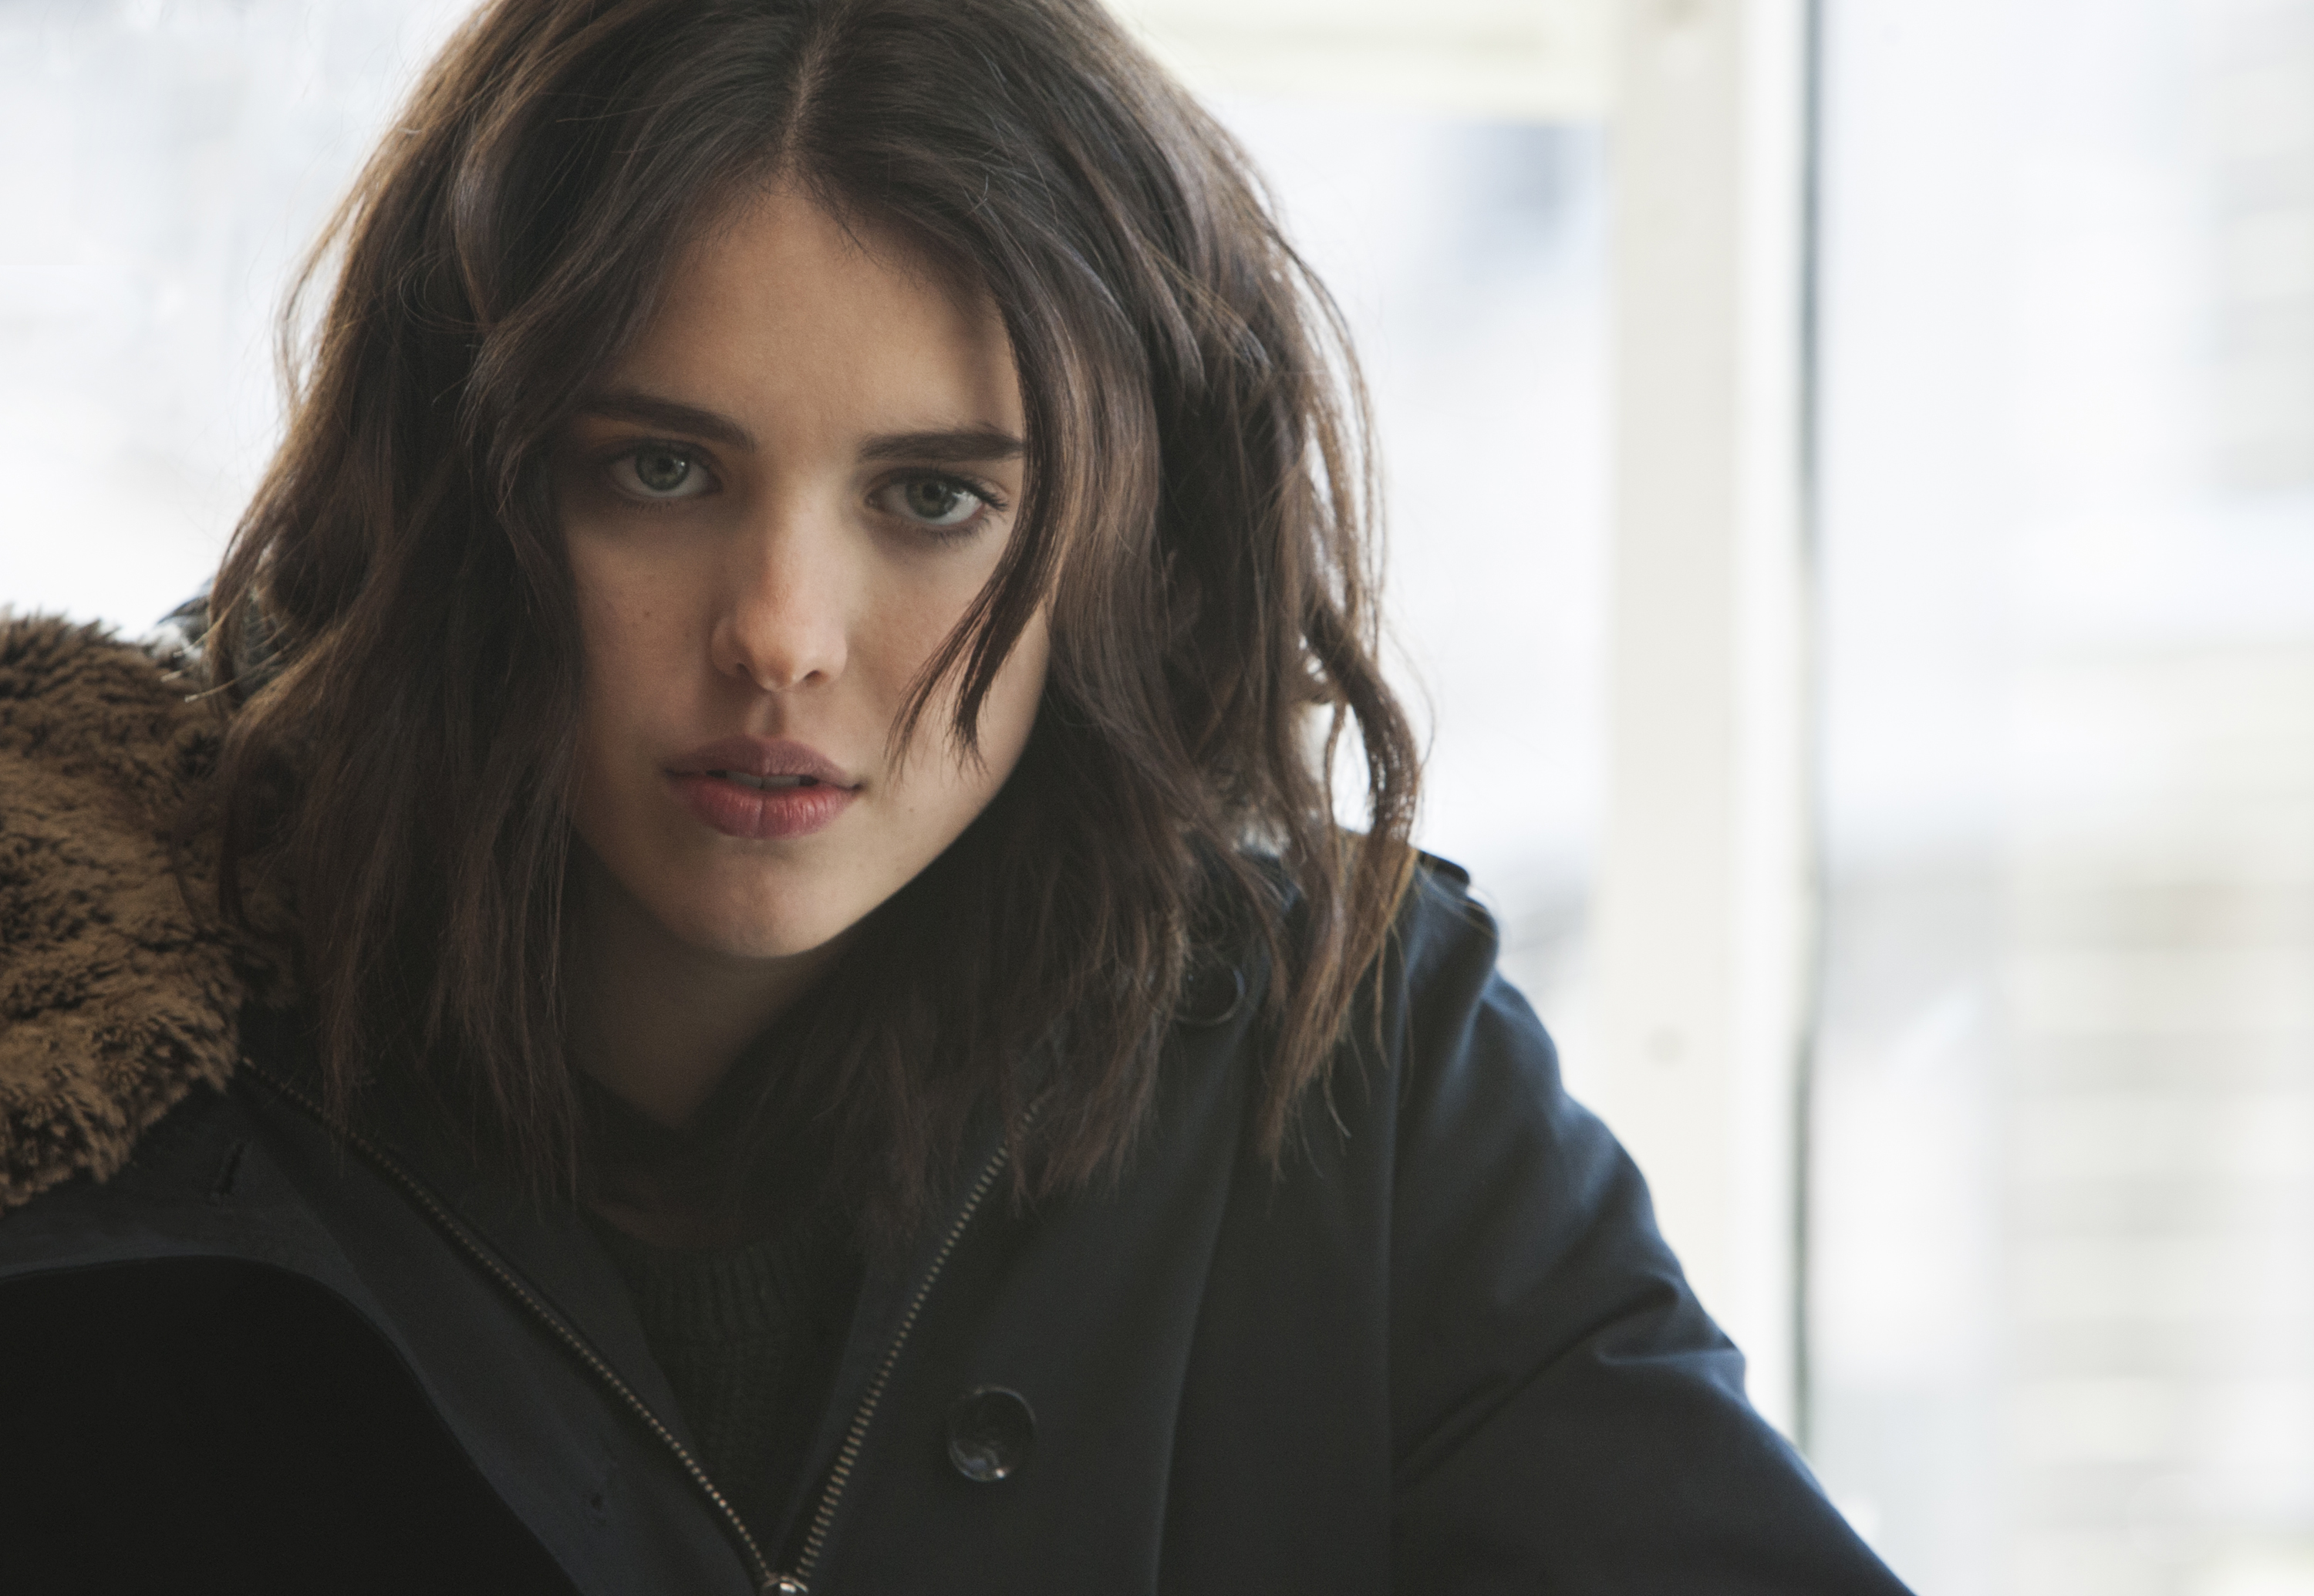 Margaret Qualley Wallpapers